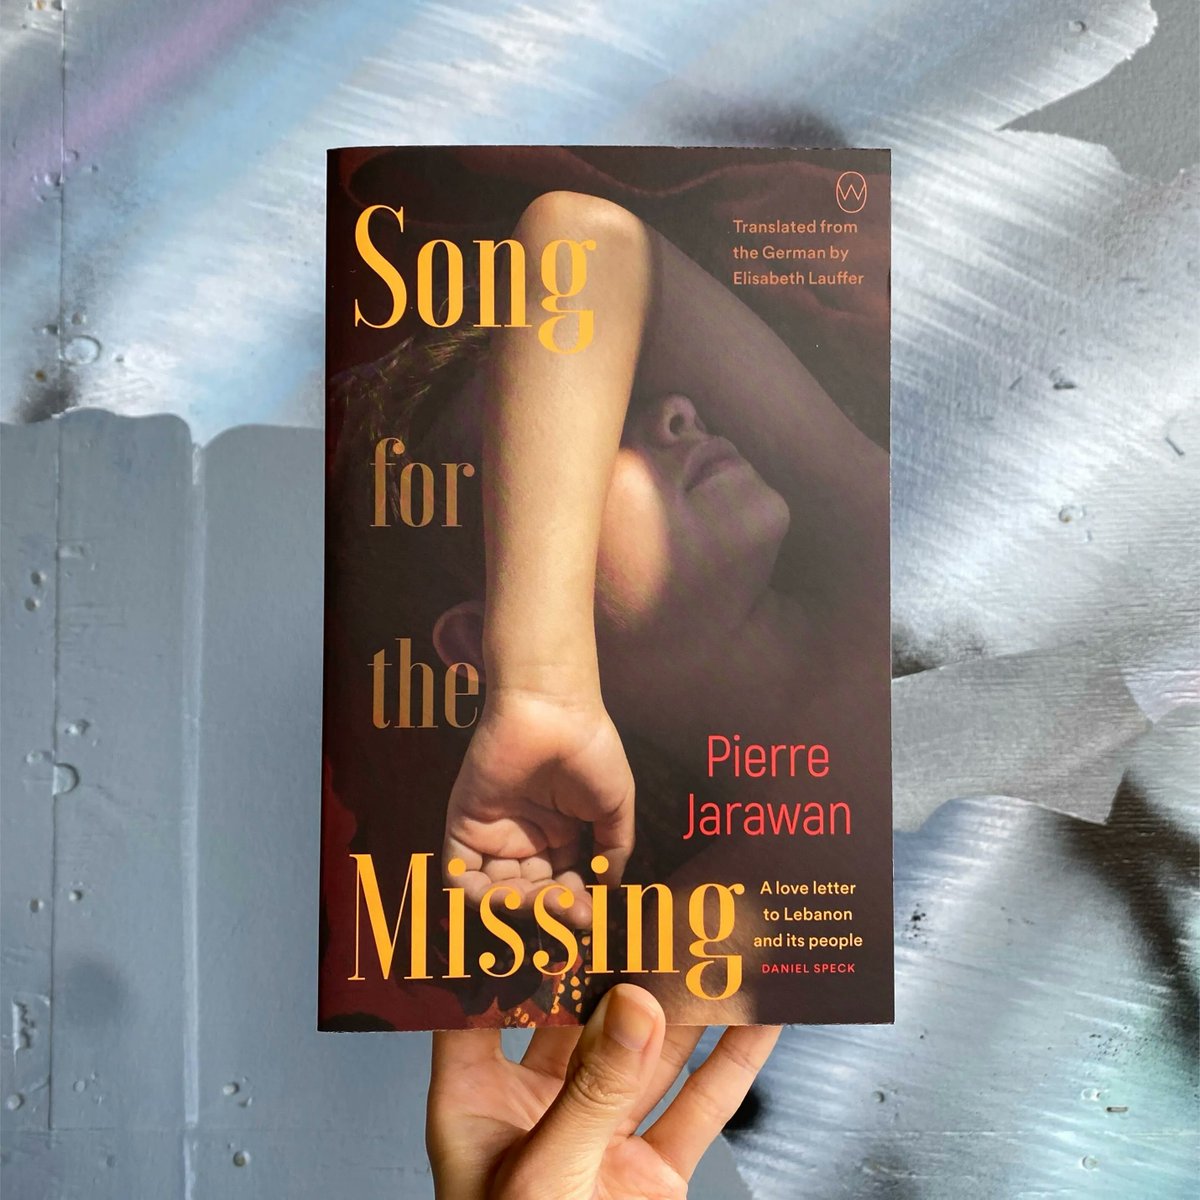 Lebanese-German author @pierre_jarawan joins us in Vancouver at #VWF2022 with Song for the Missing, a sensitive novel that skillfully interweaves a deeply personal story with the tumultuous history of the Middle East. Available in English now from @WorldEdBooks.